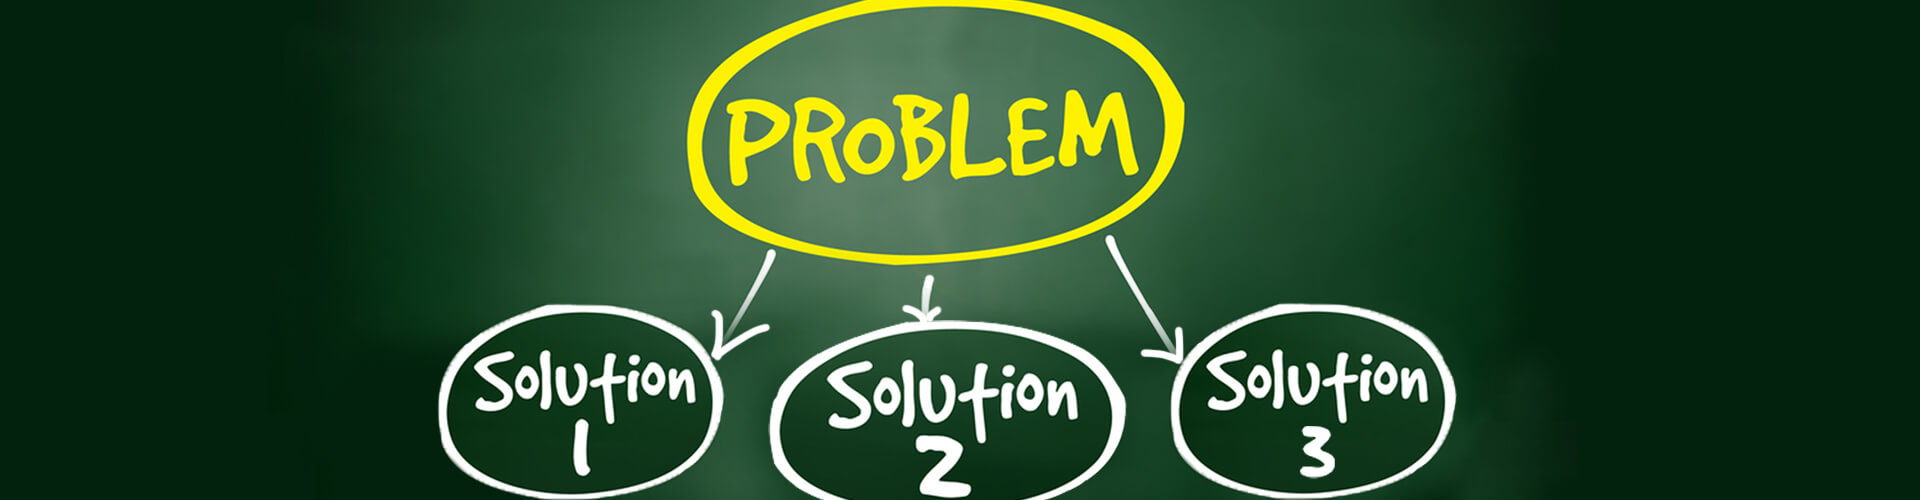 solution occurs during which step of the problem solving process